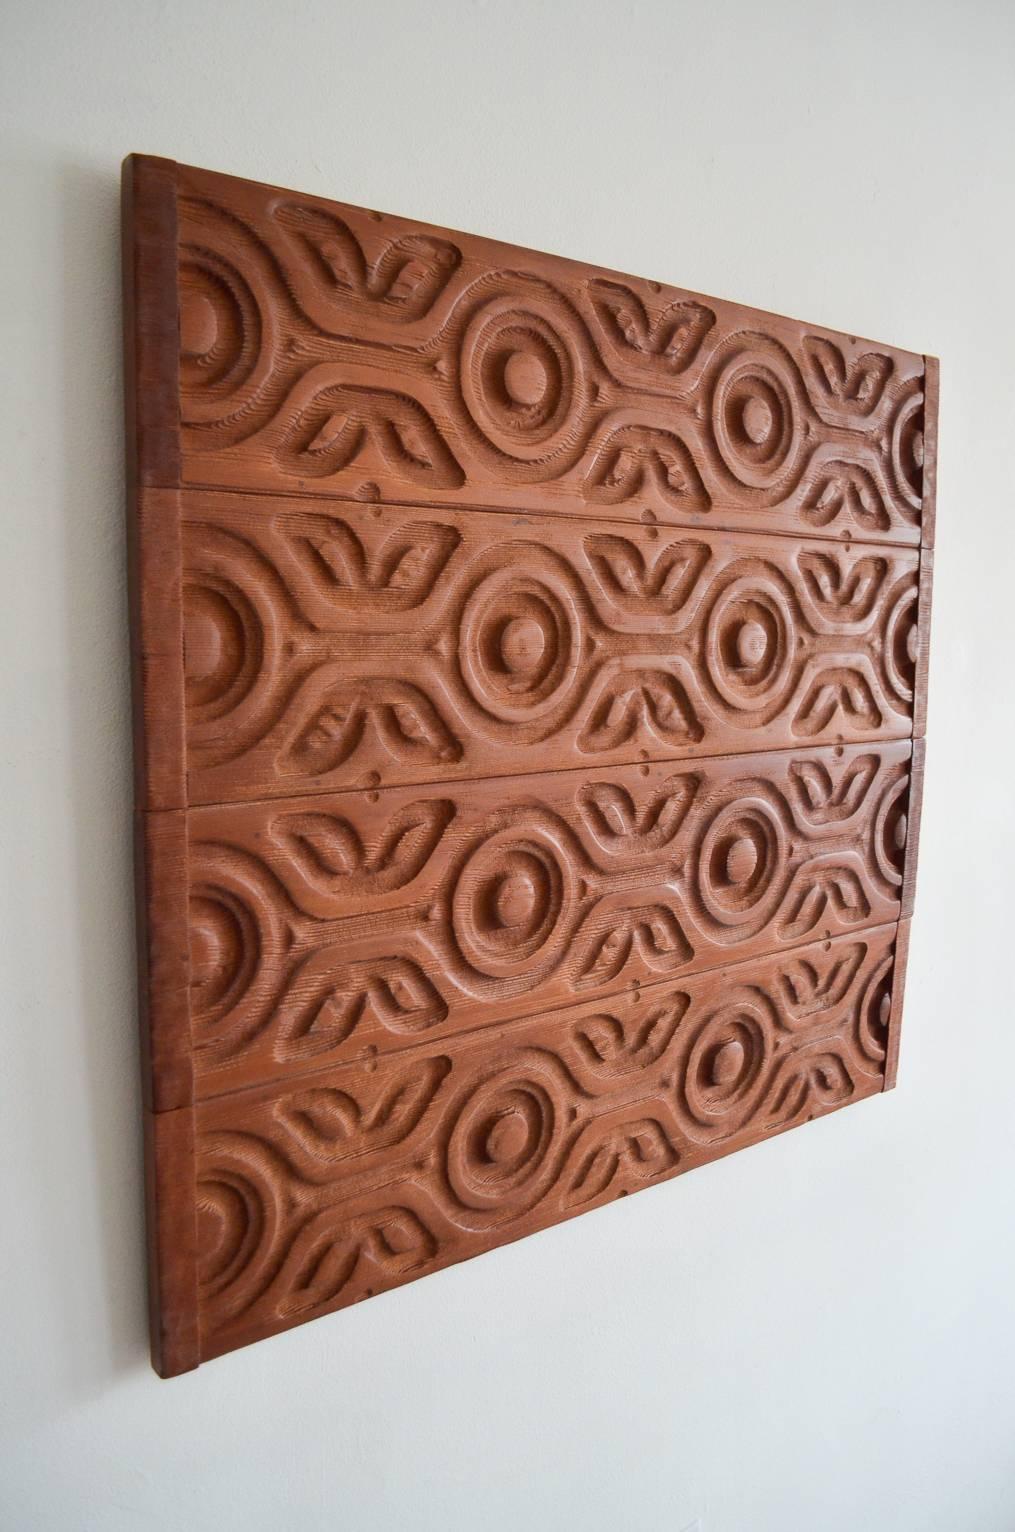 Sherrill Broudy for Ackerman Panelcarve redwood panel wall hanging.  Model 807, Broudy worked with Evelyn and Jerry Ackerman carving some of the most important pieces of the era.

This piece is 4 separate panels that have been adhered to a wood